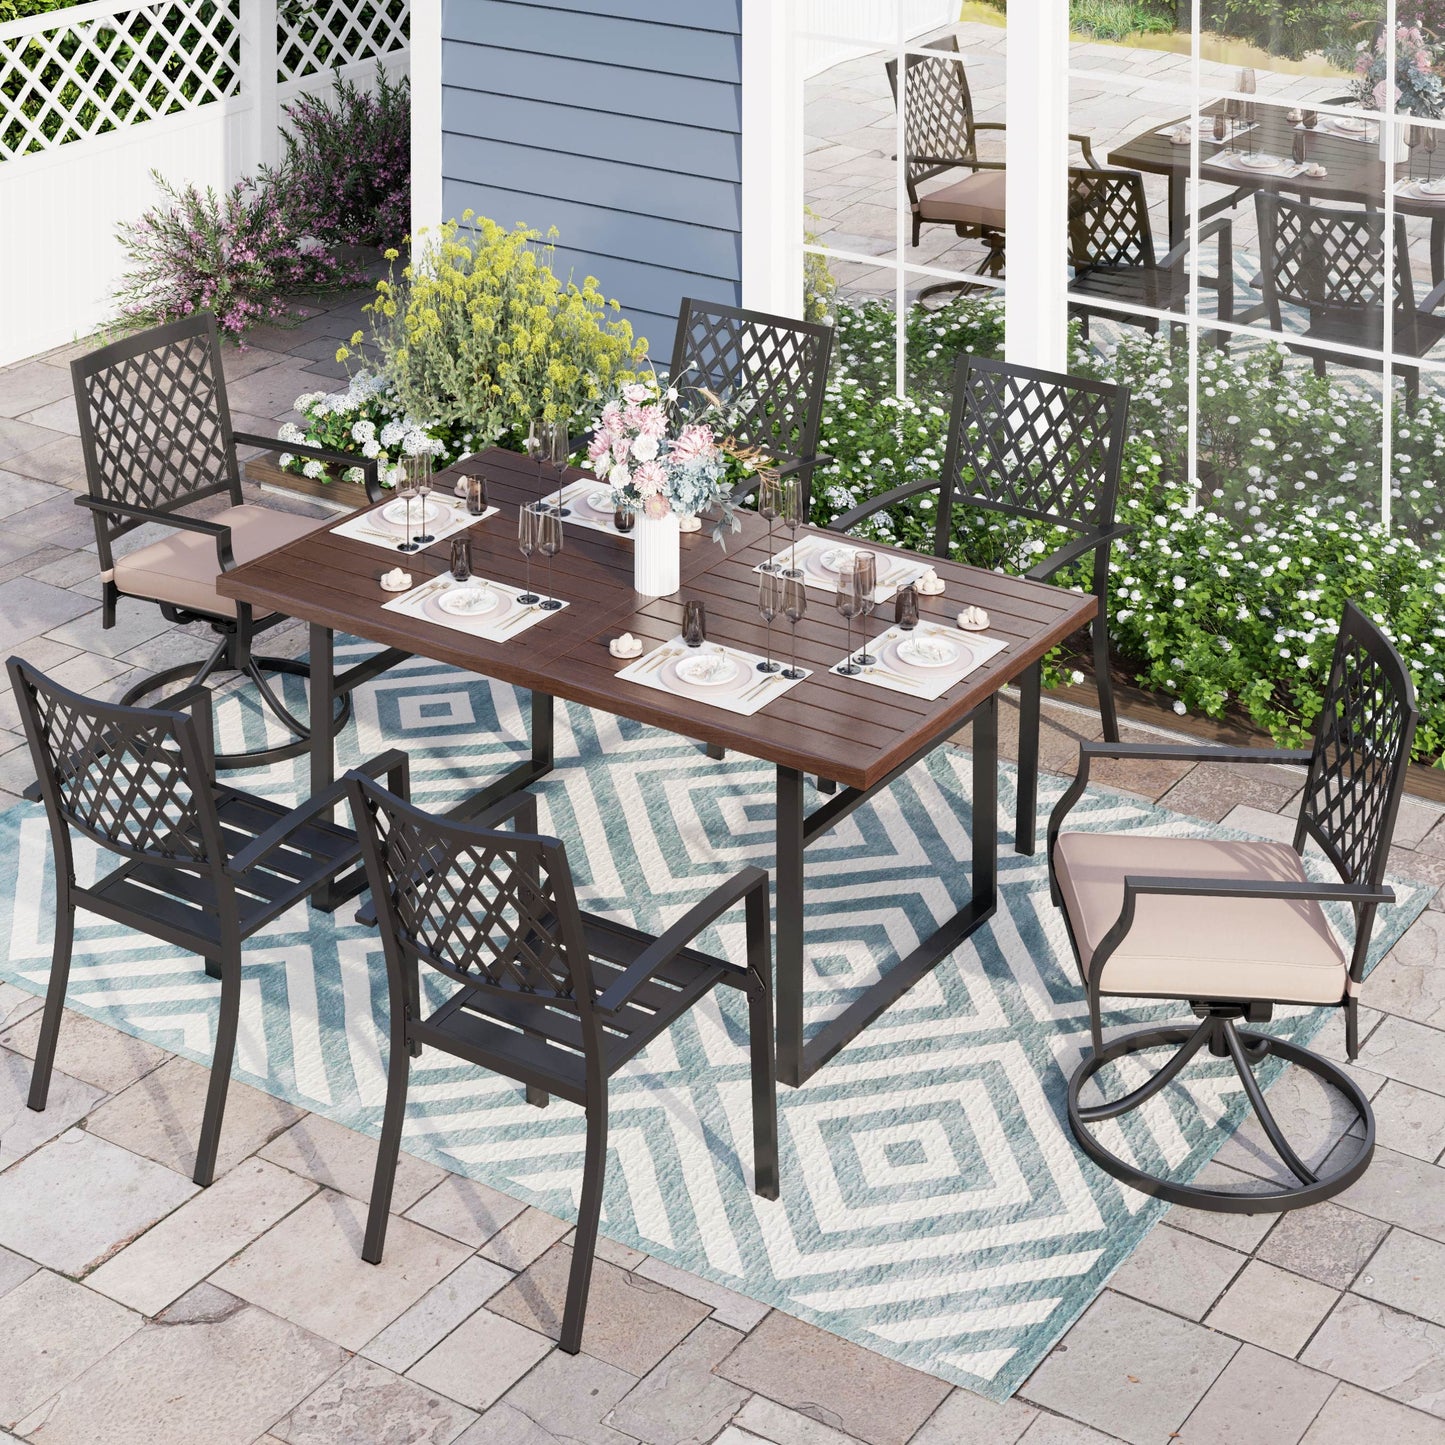 Sophia & William 7-Piece Outdoor Patio Dining Set Metal Chairs and Wood-grain Table Set